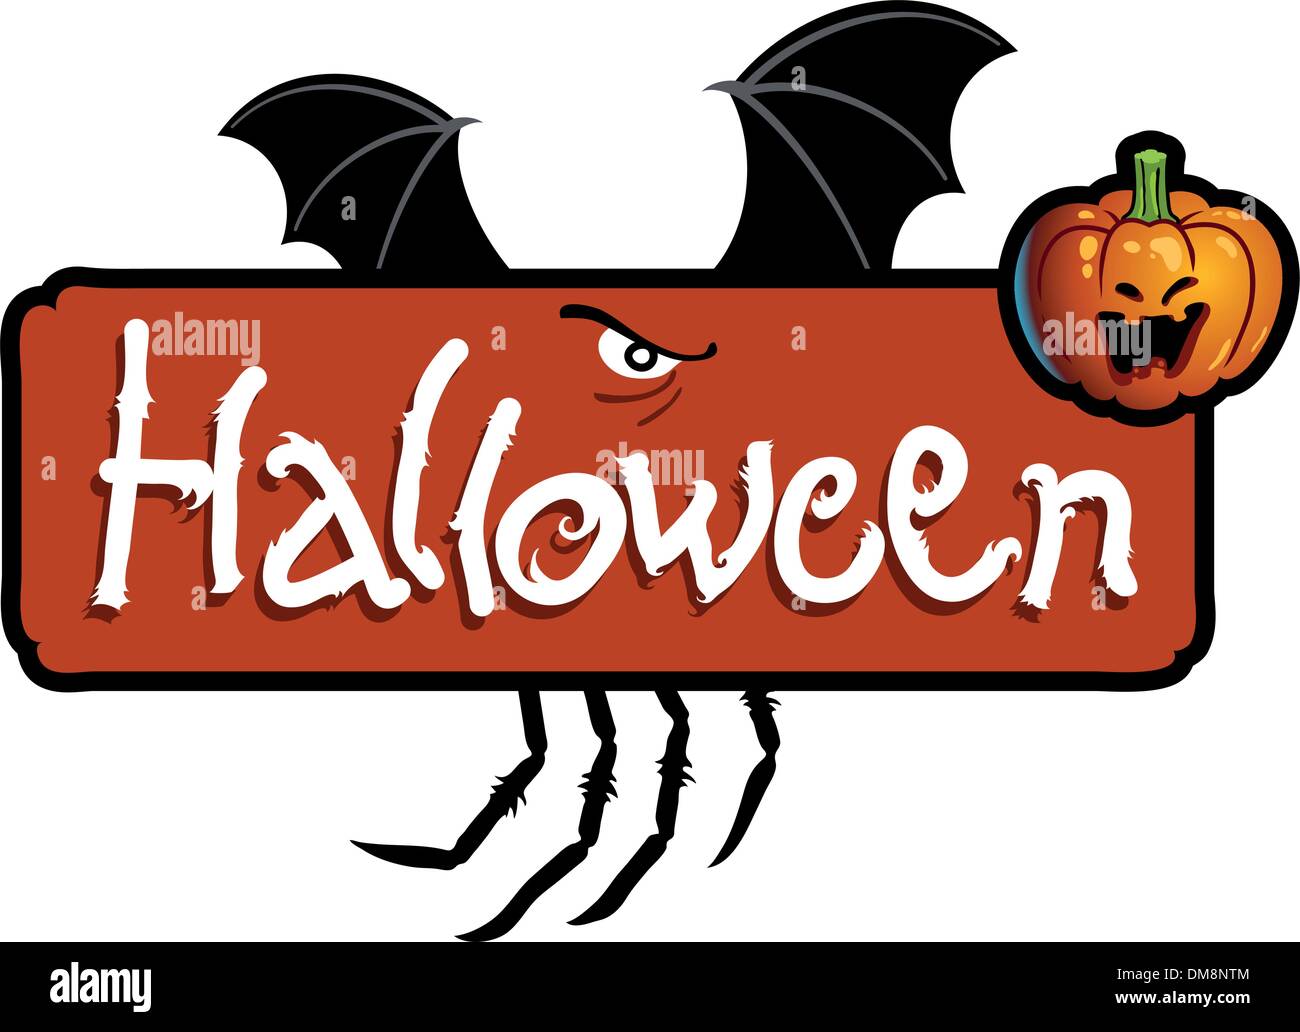 Halloween scary titling with bat wings, spider's legs and a pumpkin head of Jack-O-Lantern Stock Vector